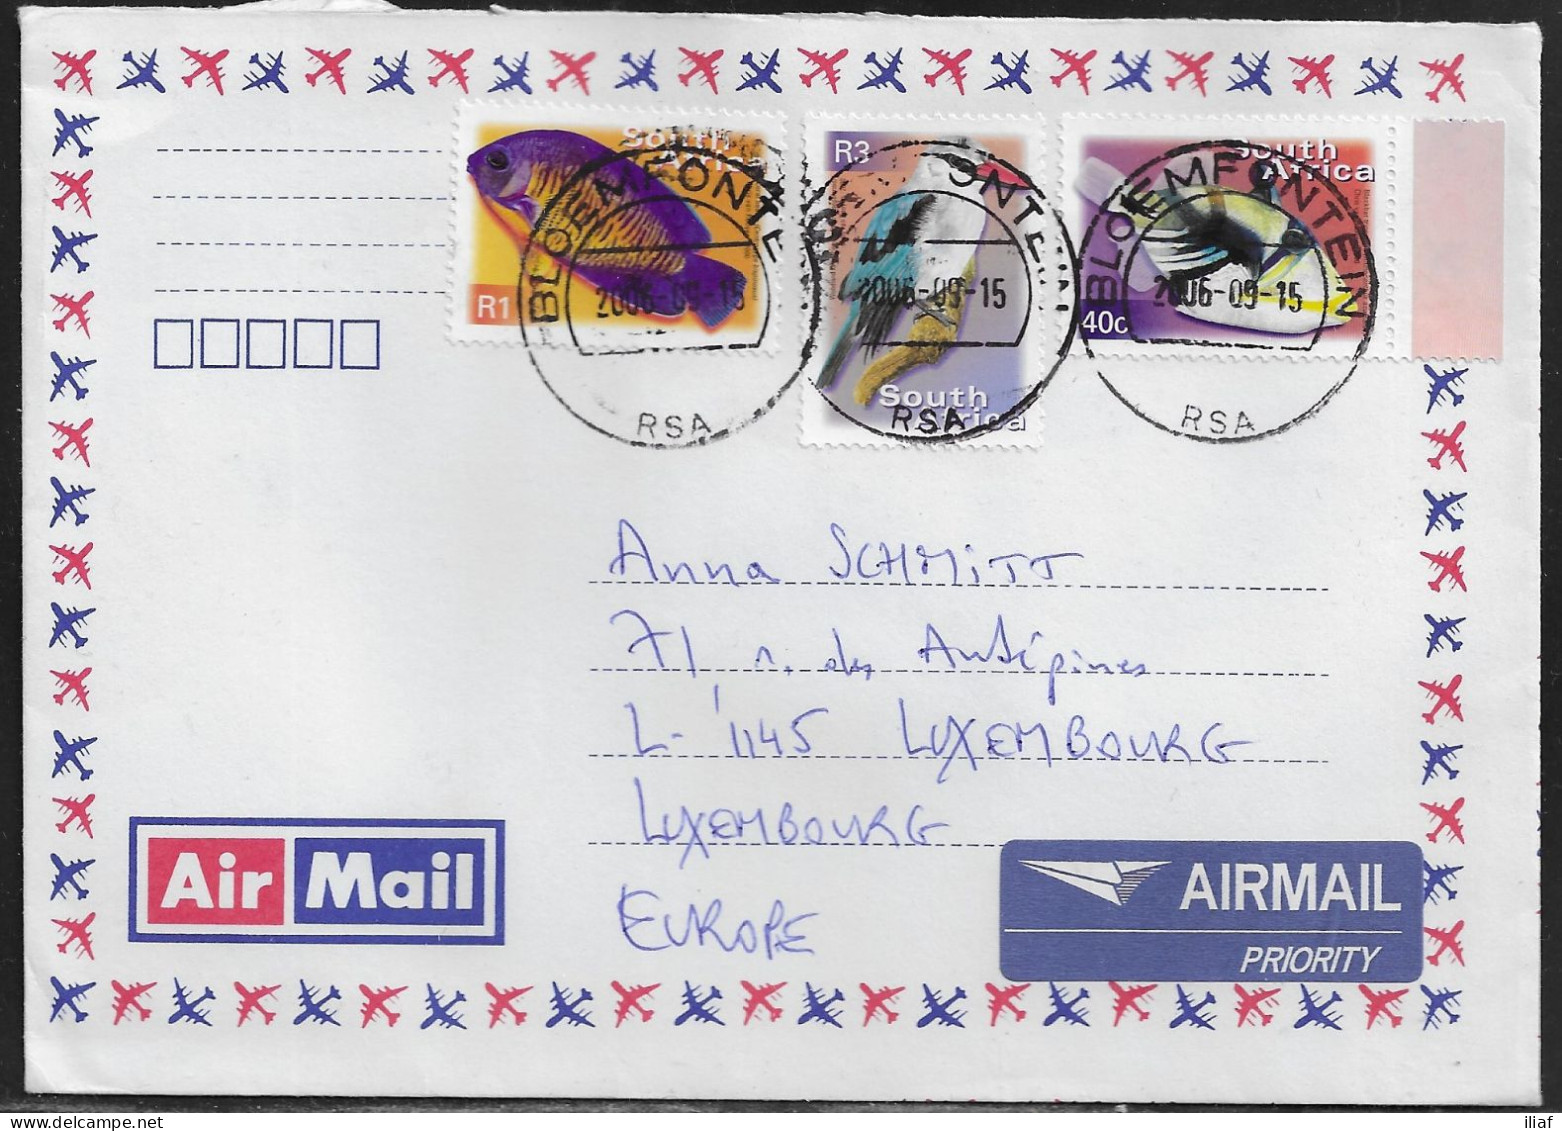 South Africa. Stamps Sc. 1177, 1183, 1194 On Air Mail Letter, Sent From South Africa At 15.09.2006 To Luxembourg. - Brieven En Documenten